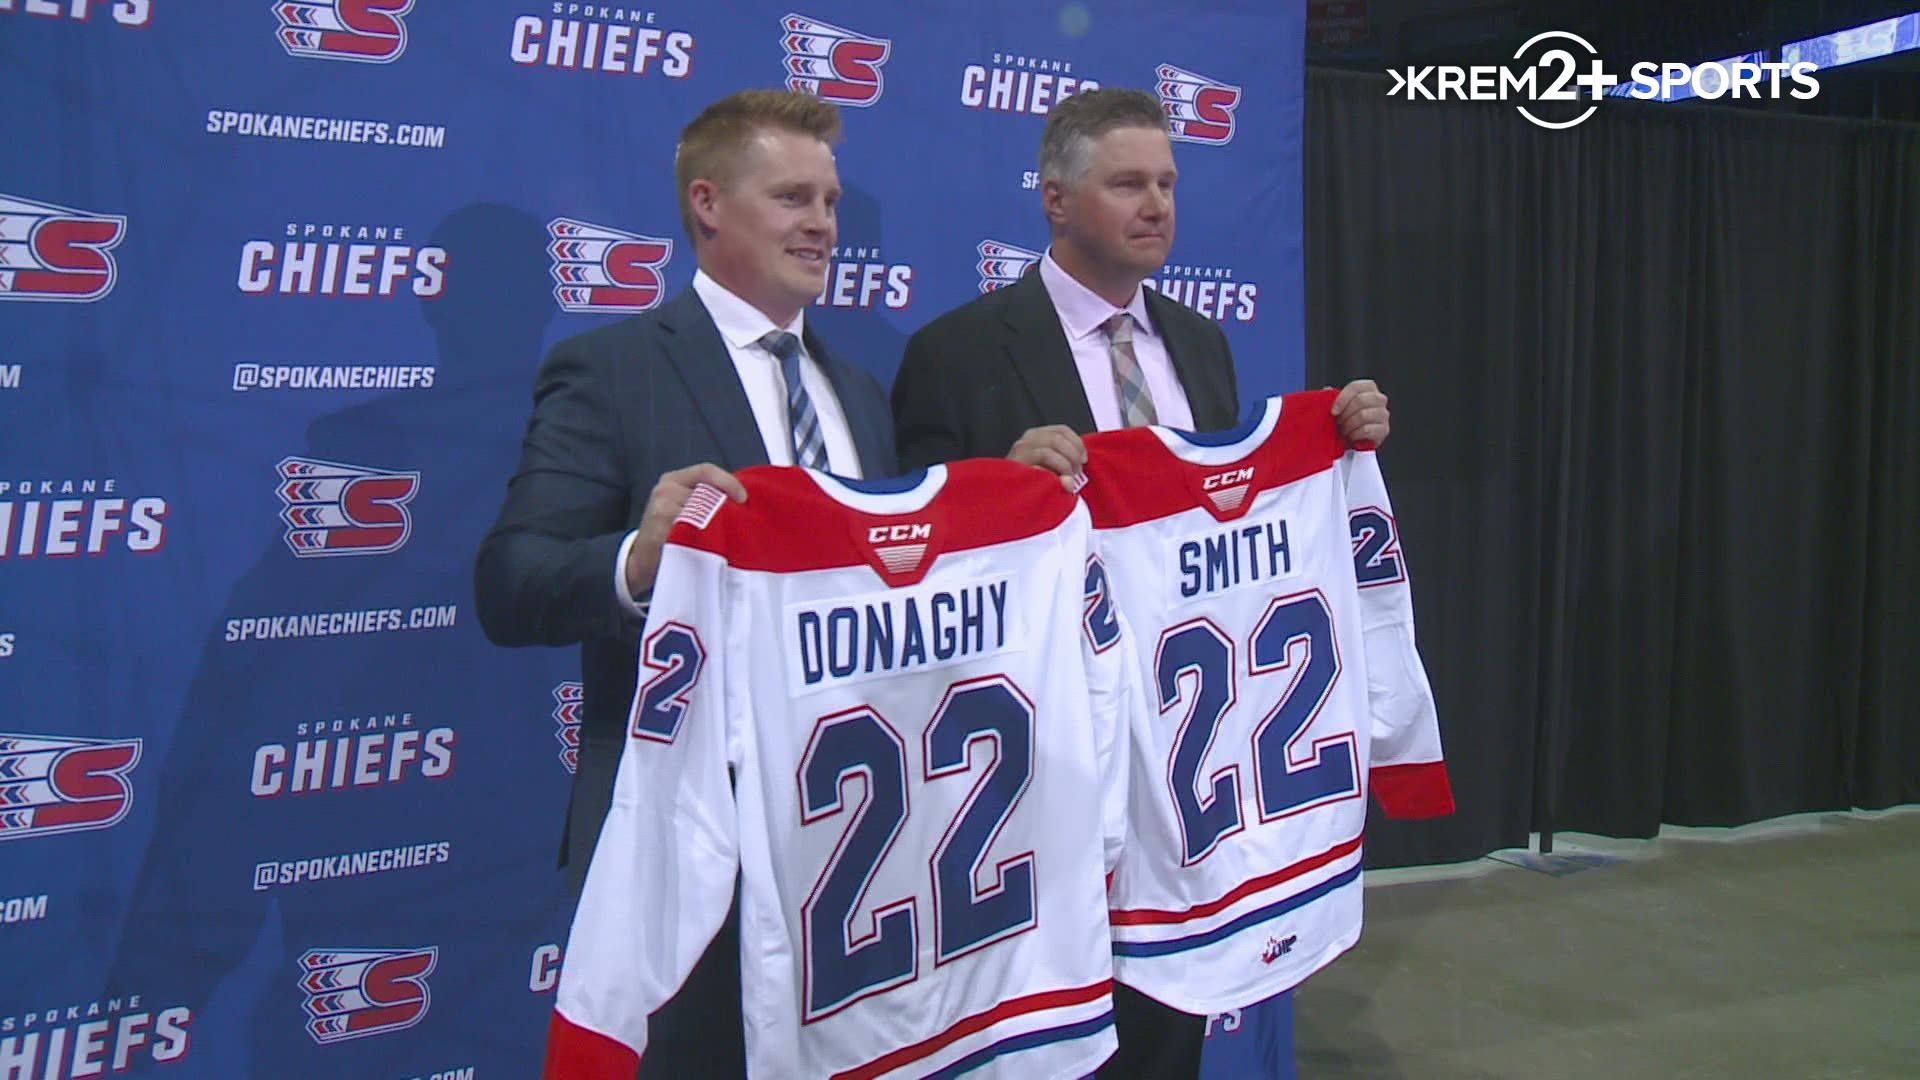 The Spokane Chiefs introduced Ryan Smith as permanent head coach and former Chief Dustin Donaghy as assistant coach Monday.